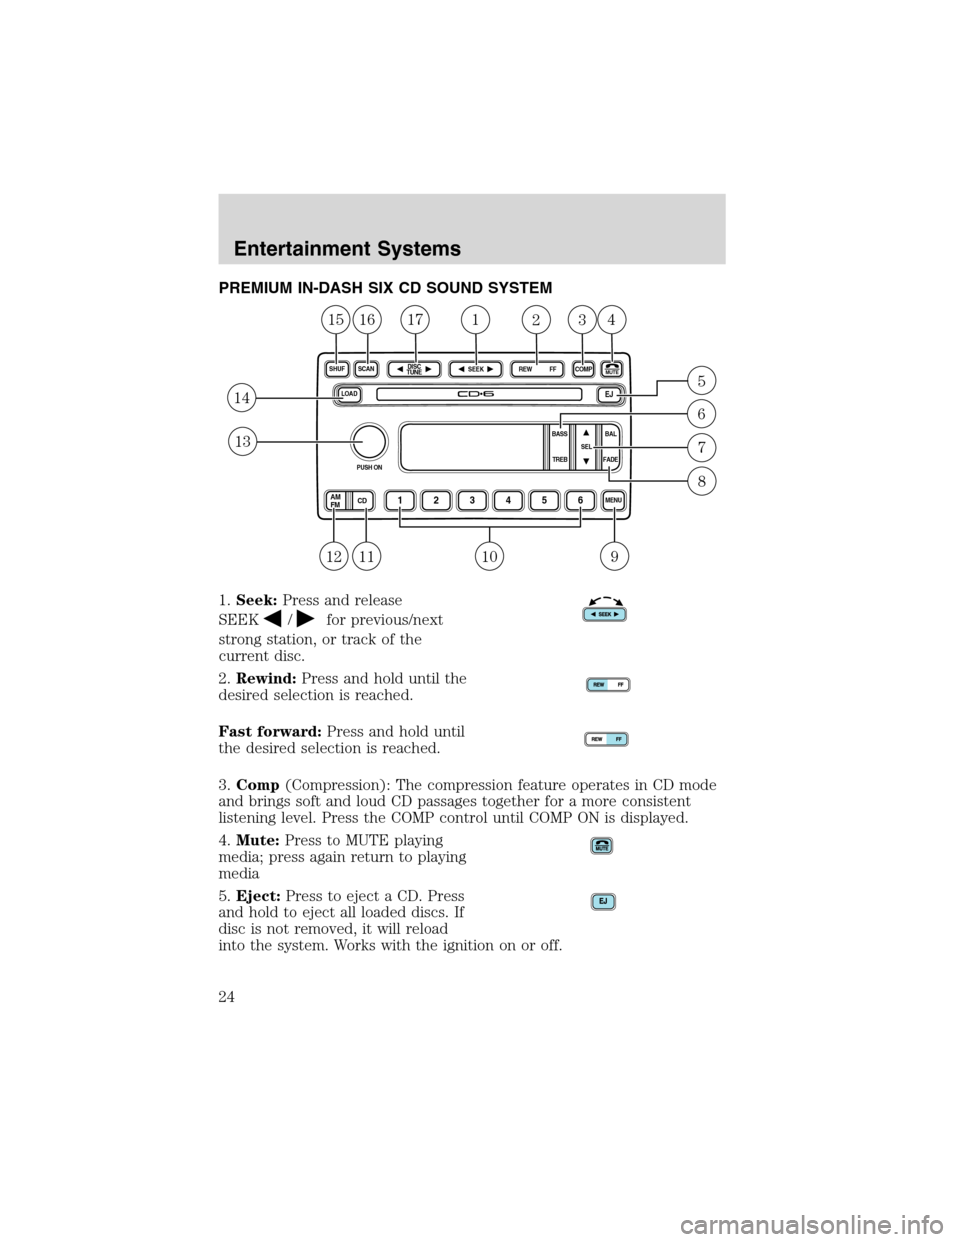 FORD E SERIES 2003 4.G Owners Manual PREMIUM IN-DASH SIX CD SOUND SYSTEM
1.Seek:Press and release
SEEK
/for previous/next
strong station, or track of the
current disc.
2.Rewind:Press and hold until the
desired selection is reached.
Fast 